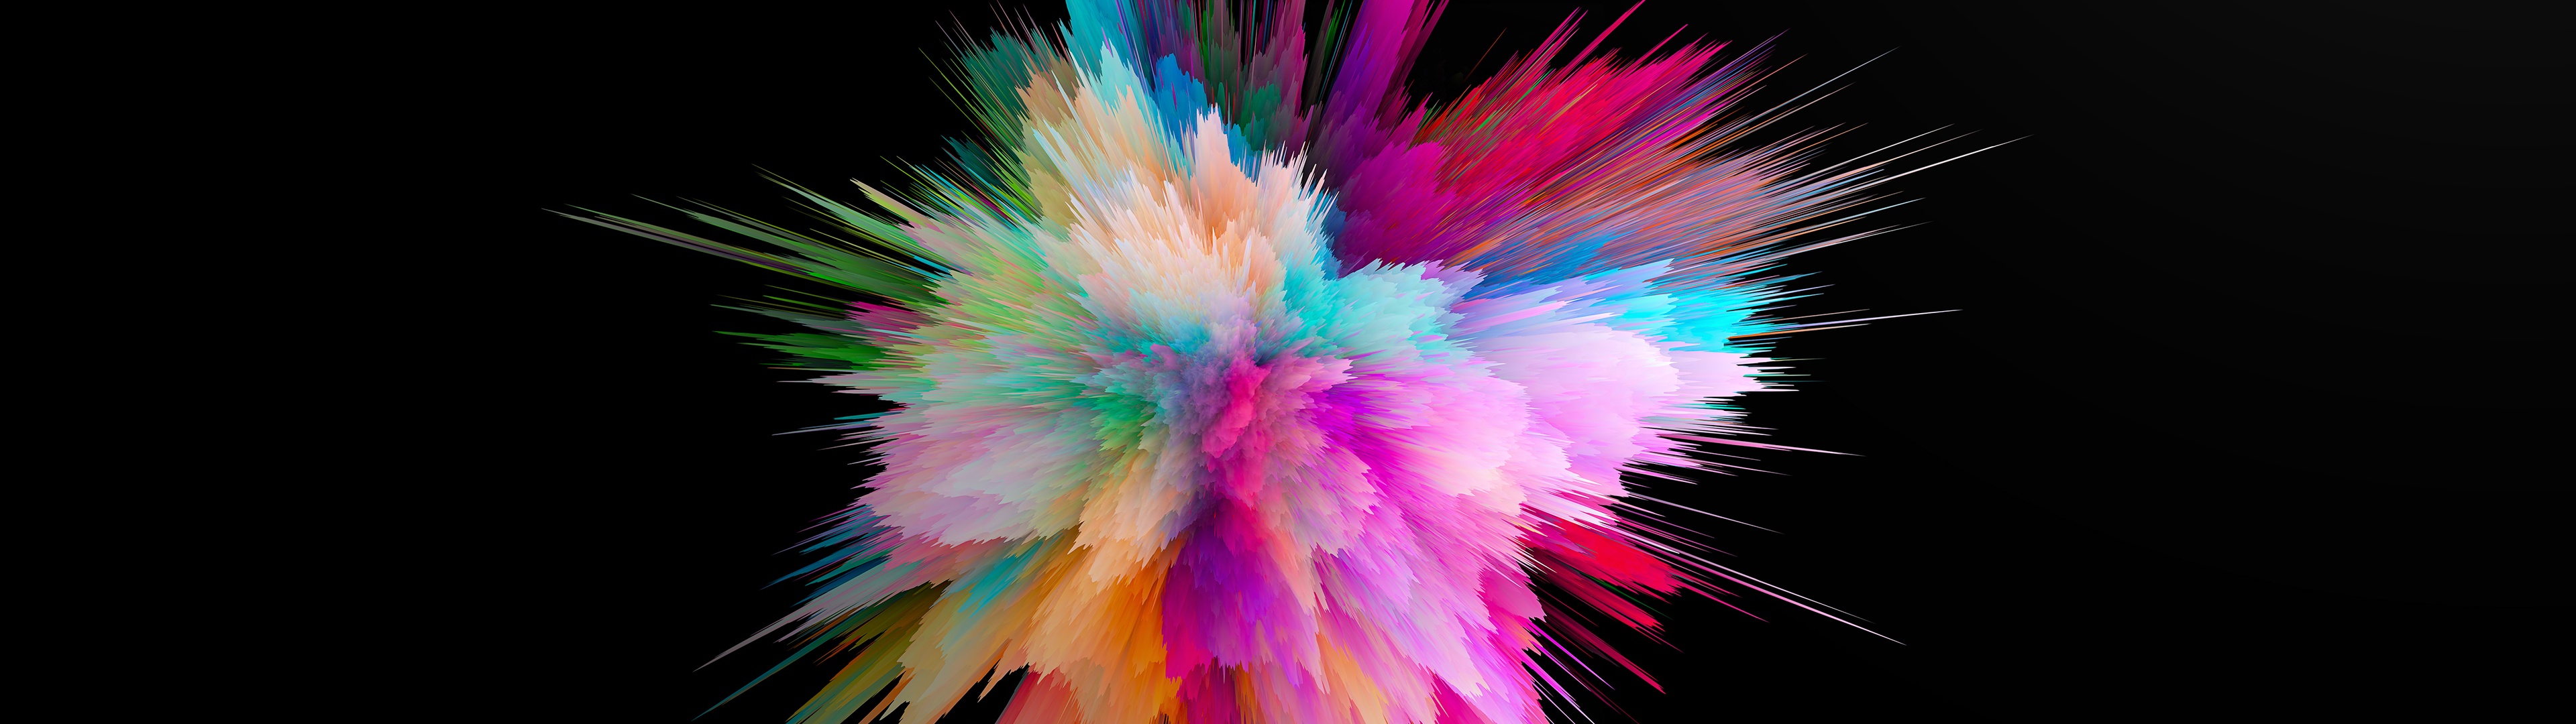 Color burst Wallpaper 4K, Colorful, Explosion, Abstract, #6654